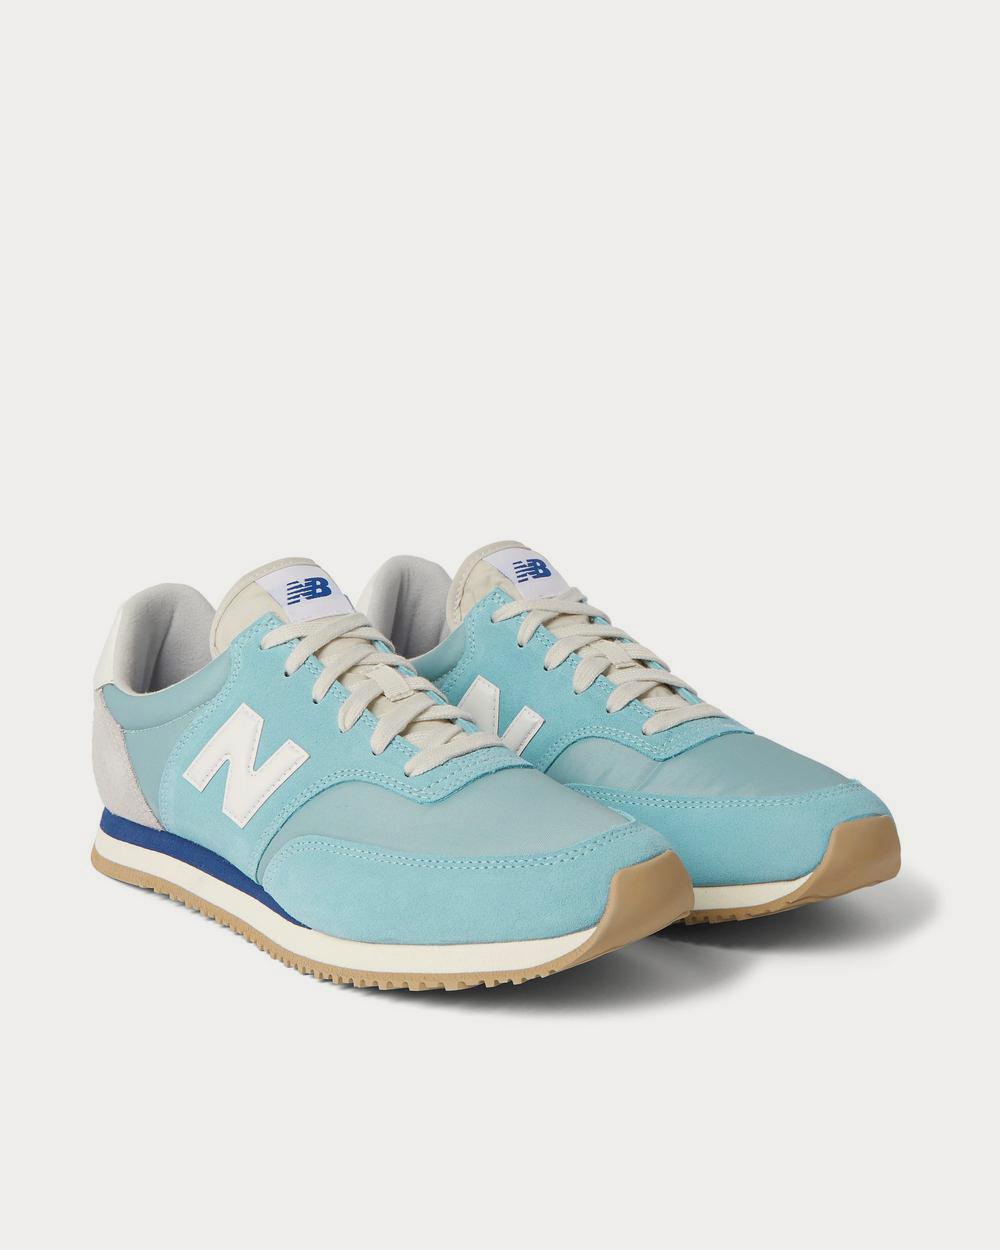 New Balance - Comp 100 Leather and Suede-Trimmed Shell  Light blue low top sneakers